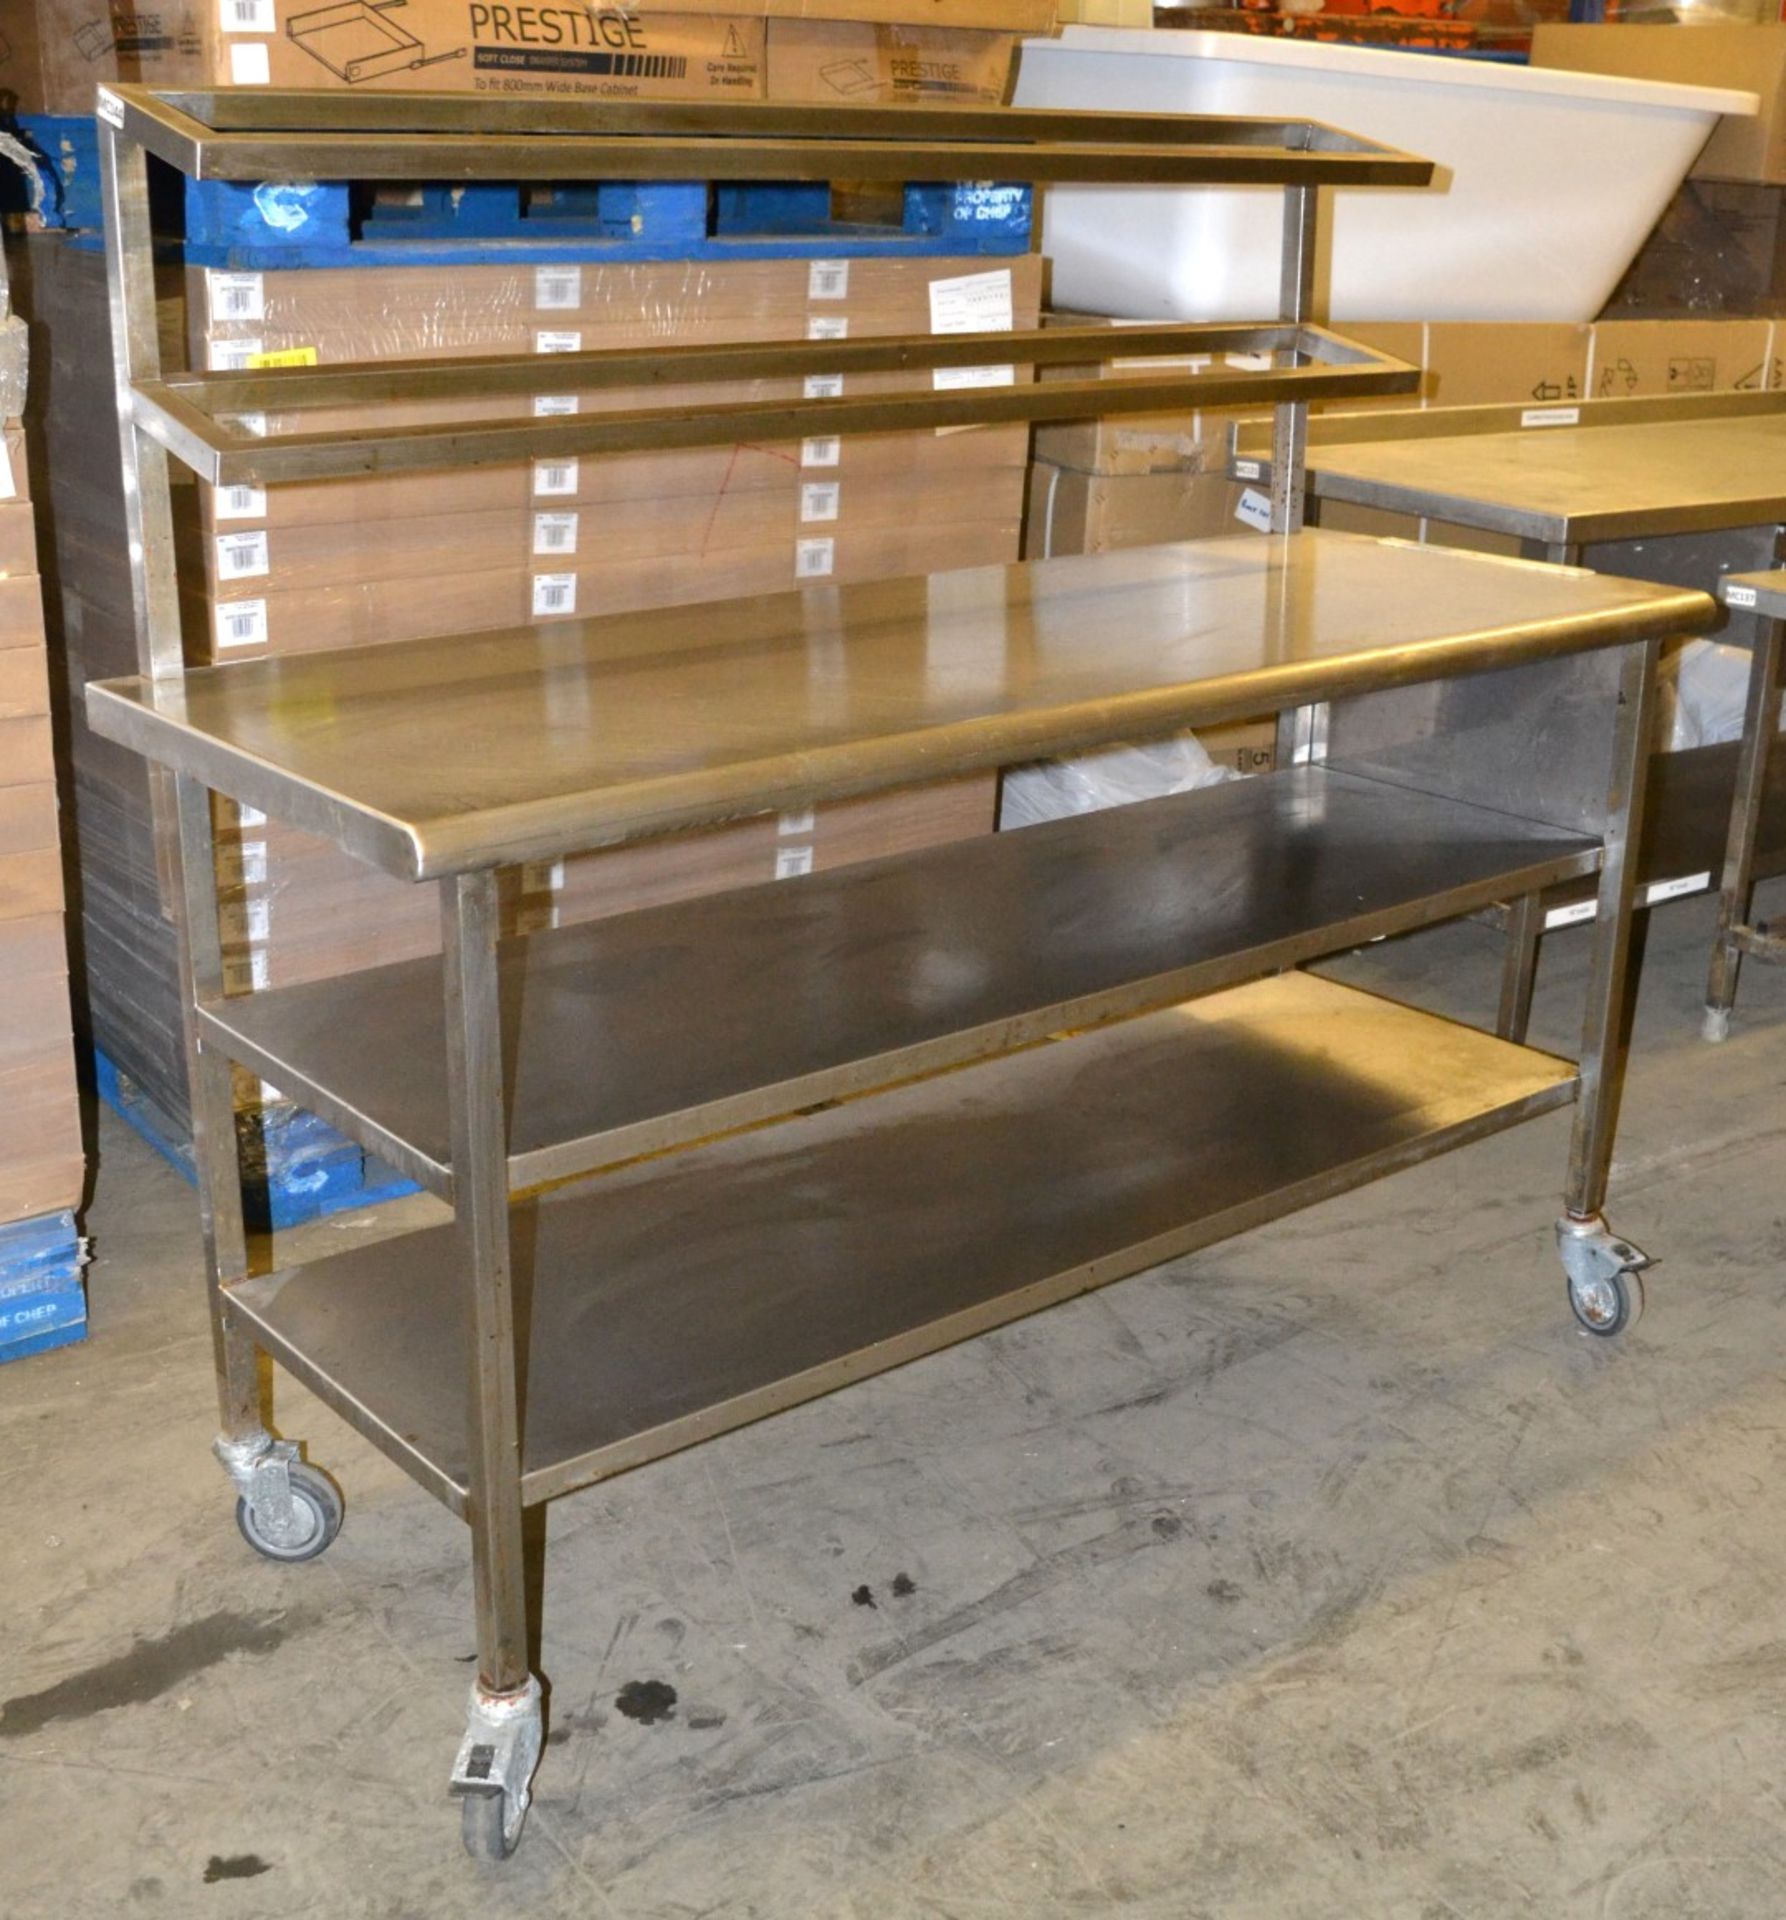 1 x Wheeled Stainless Steel Sandwich Preparation Table - Dimensions: 160 x 60 x 137.5cm - Ref: MC144 - Image 4 of 5